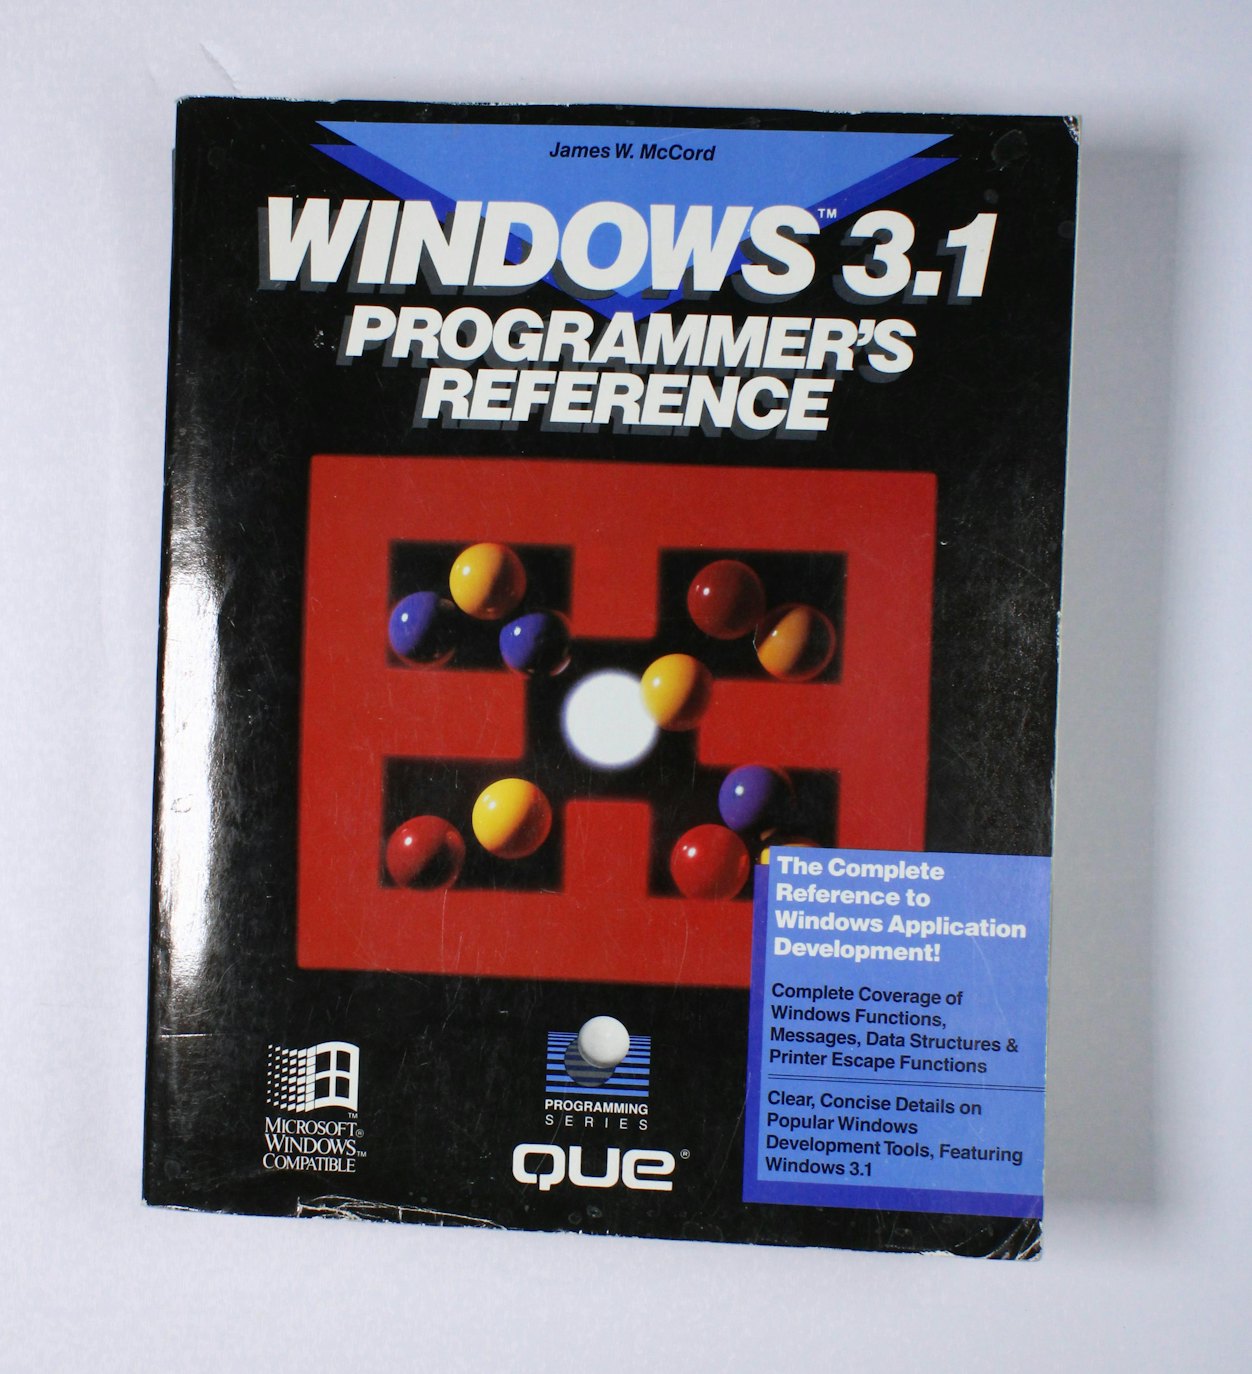 Windows 3.1 Programmer’s Reference